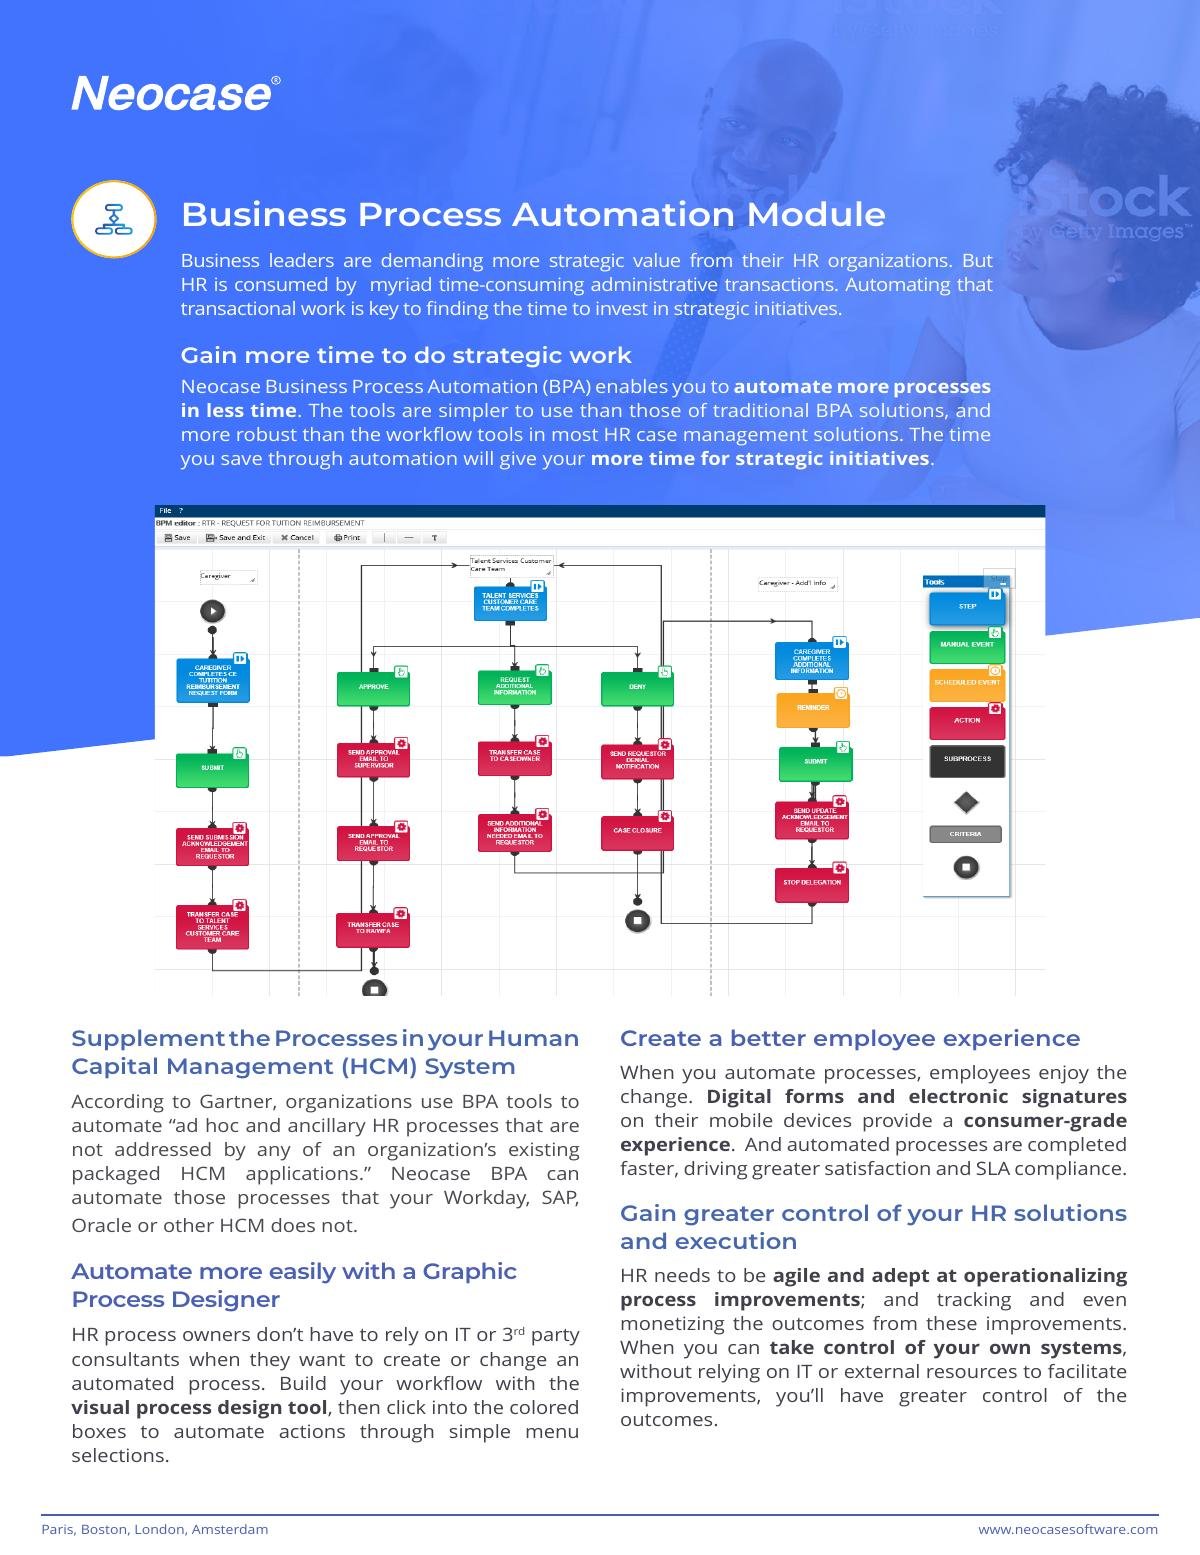 Business Process Automations